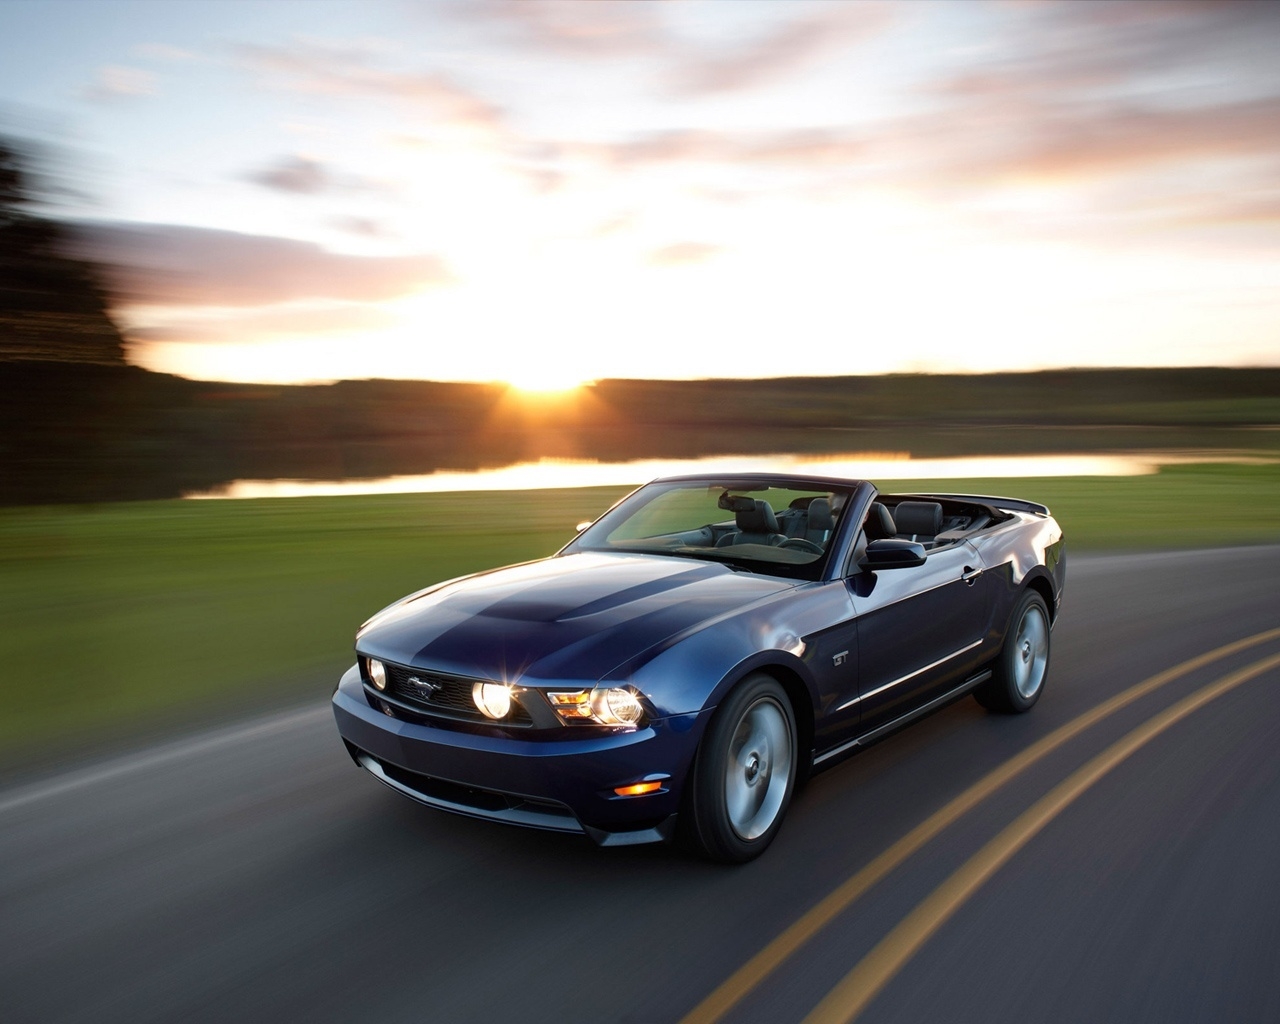 Ford Mustang Convertible 2010 for 1280 x 1024 resolution